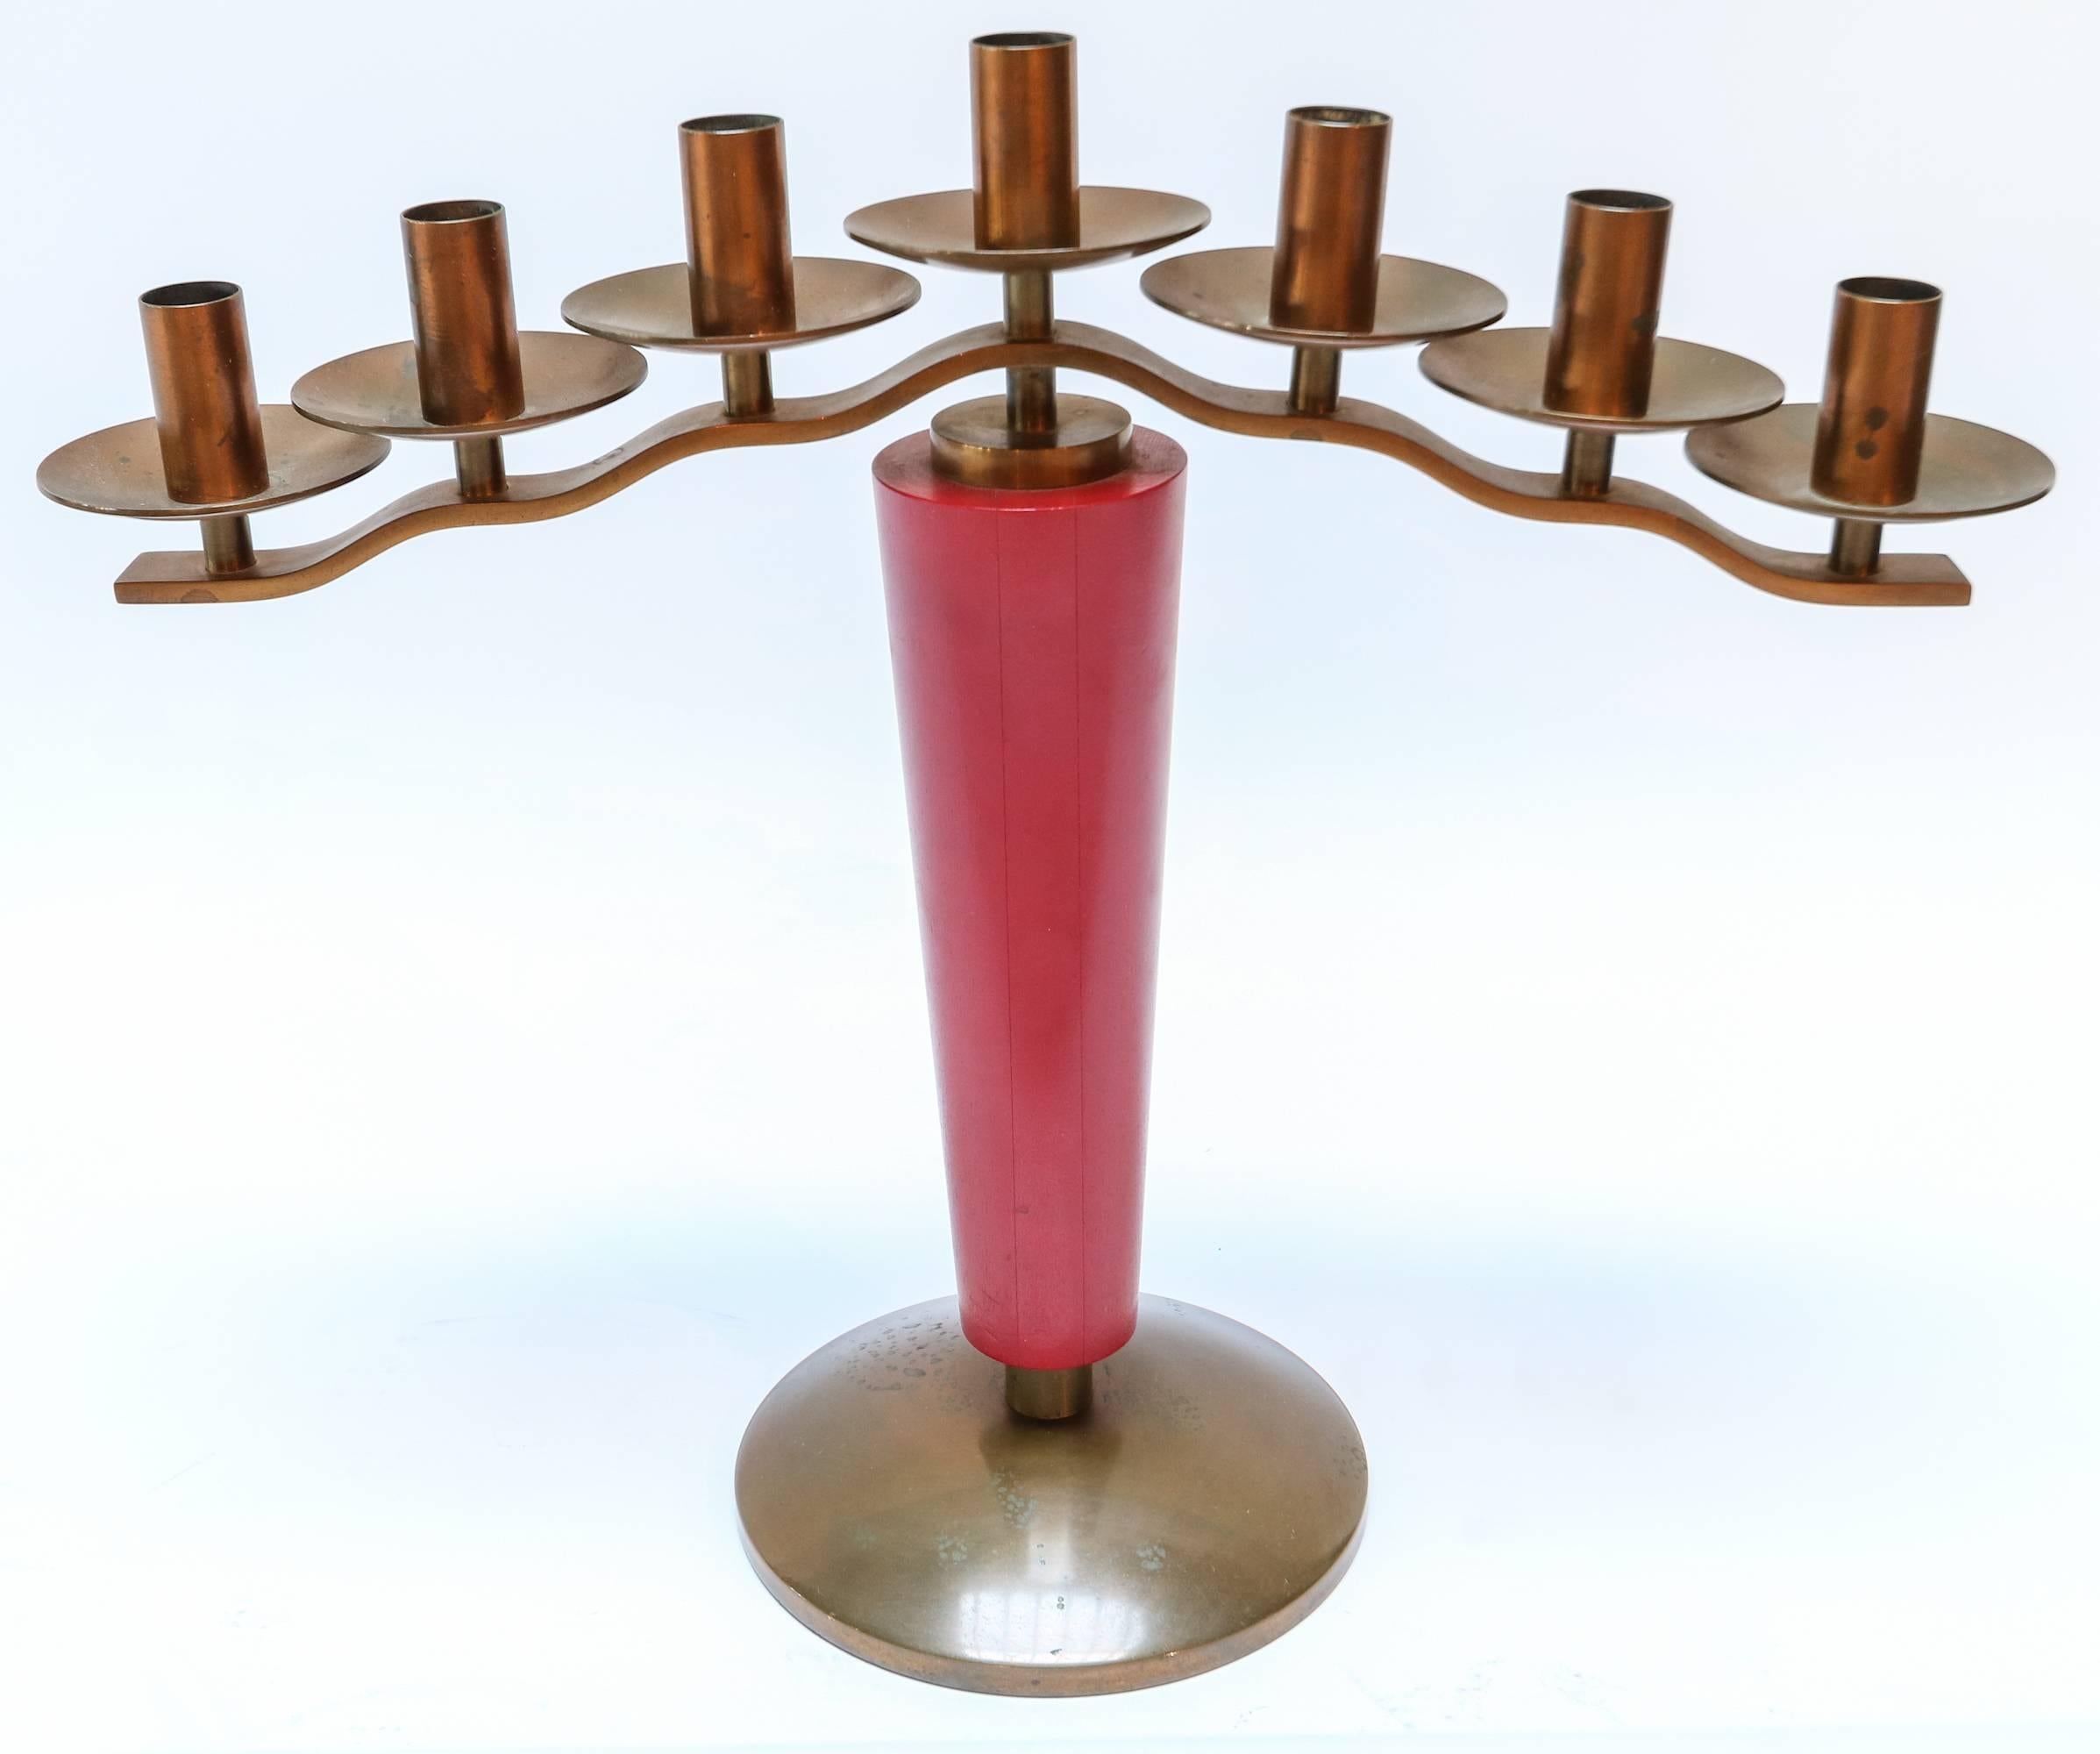 Pair of 1940s French Art Deco Brass and Red Wood Candleholders For Sale 4